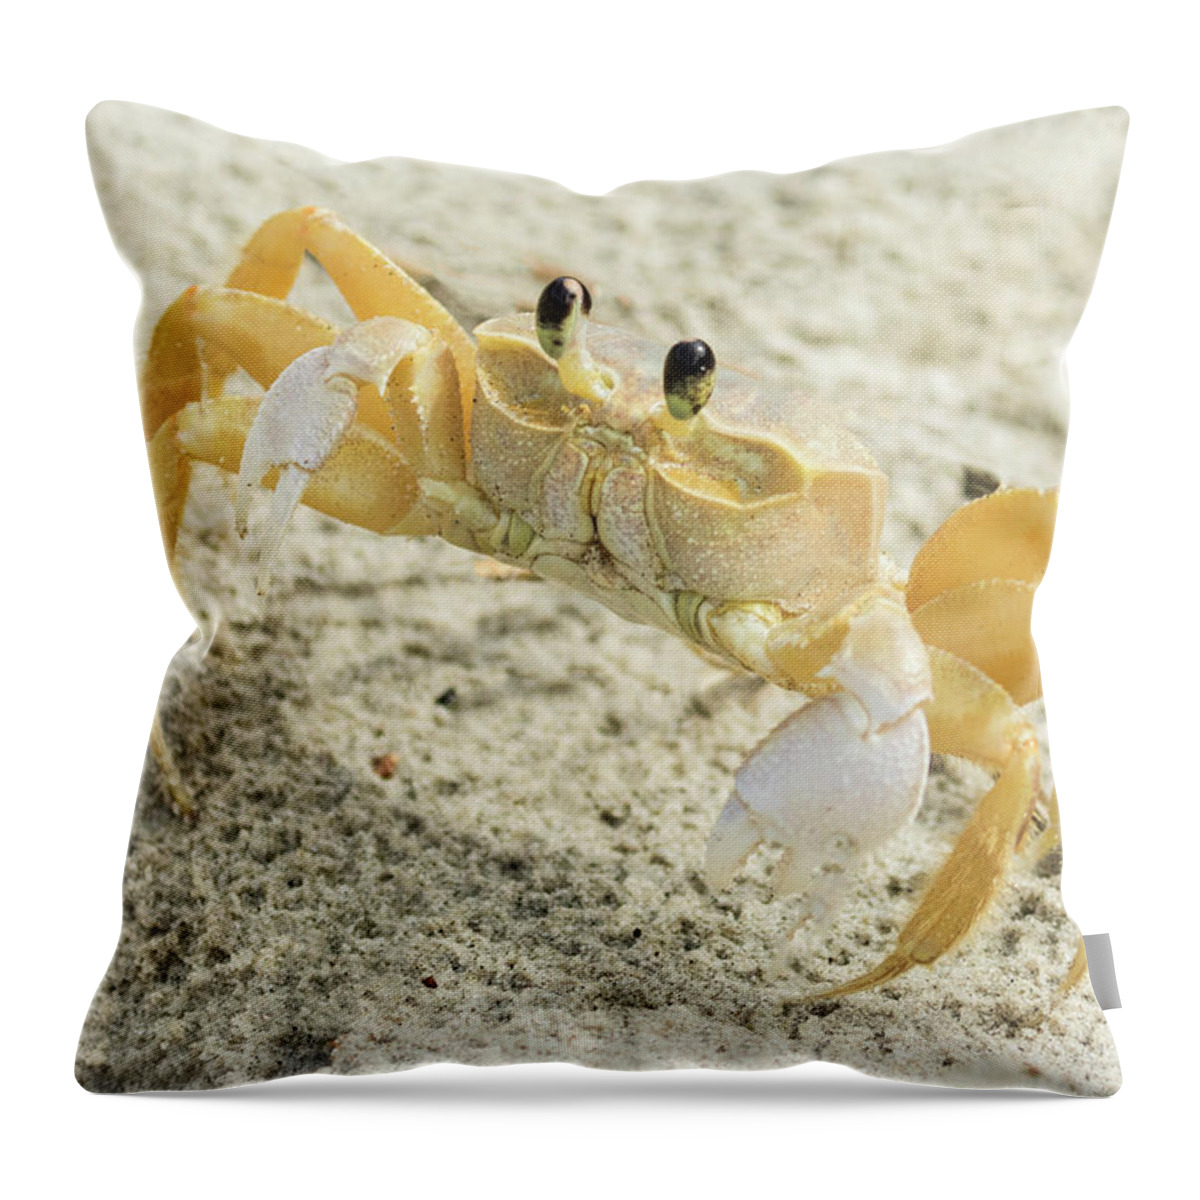 Ghost Crab Throw Pillow featuring the photograph Curious Ghost Crab by Jurgen Lorenzen